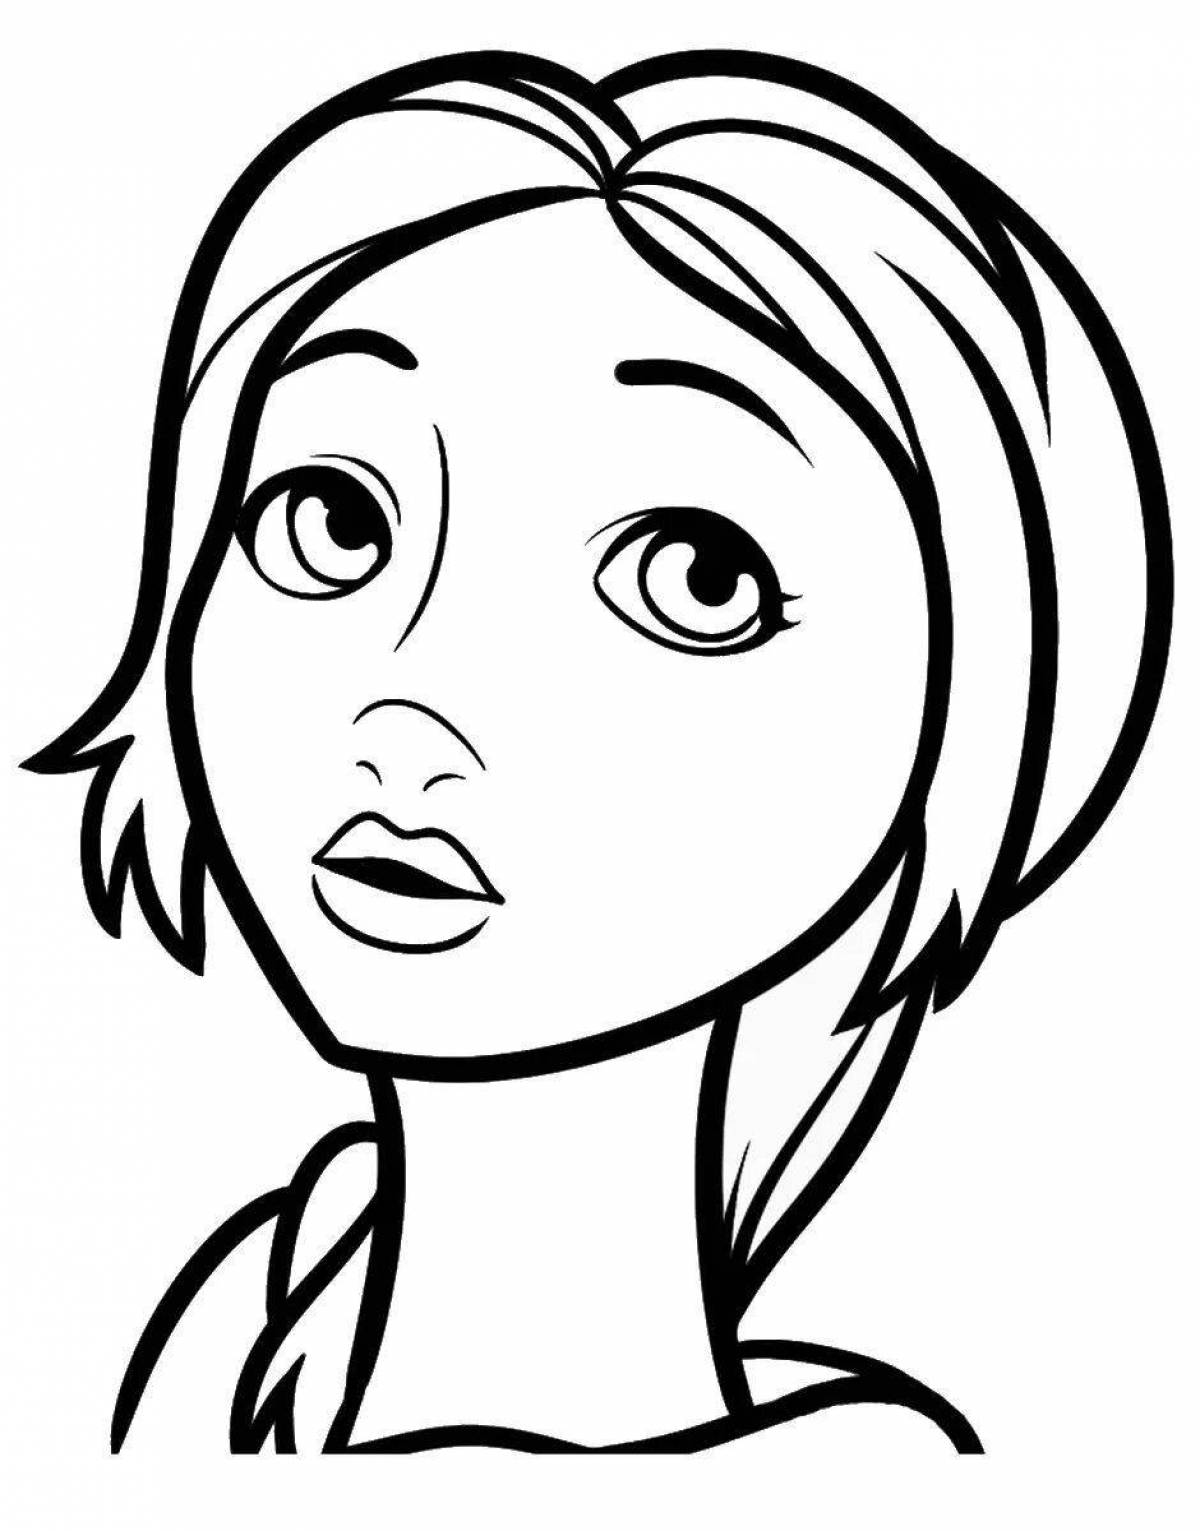 Bright human face coloring page